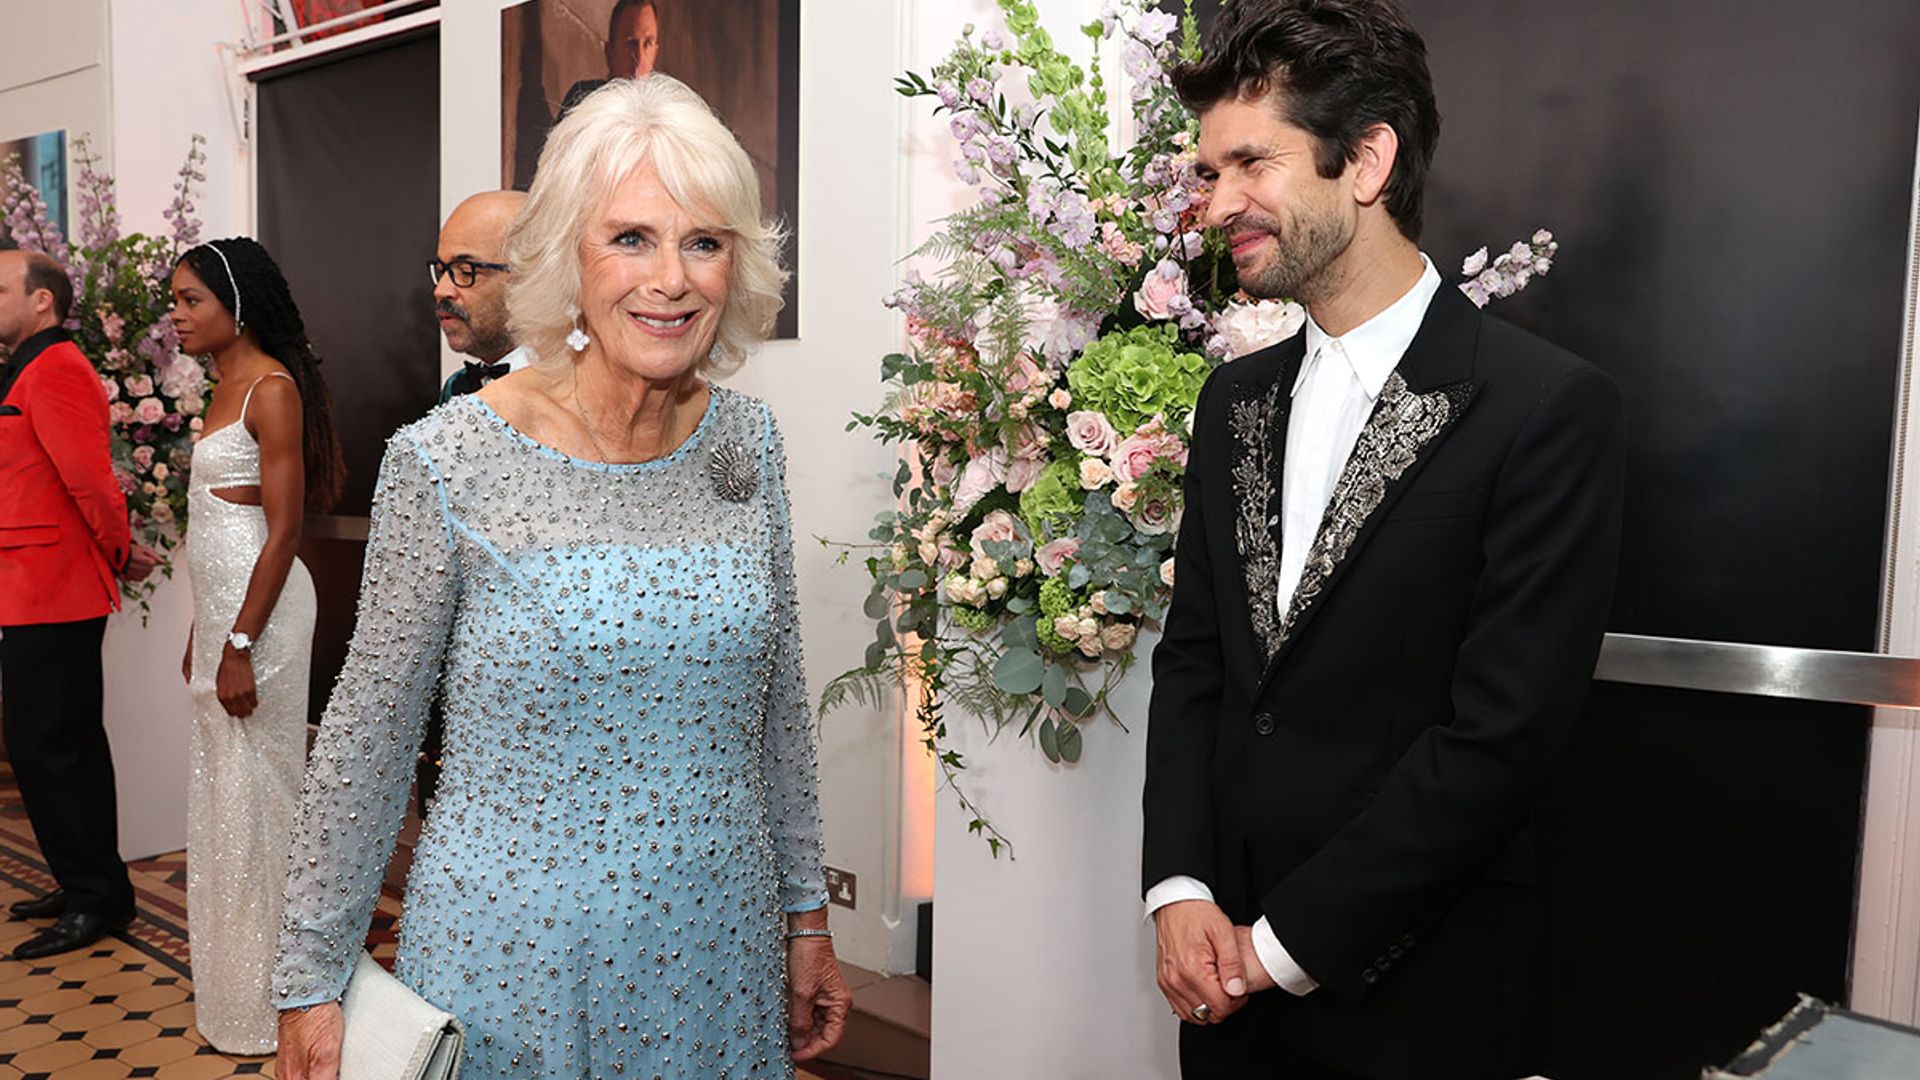 The Duchess of Cornwall's royal first at James Bond premiere revealed